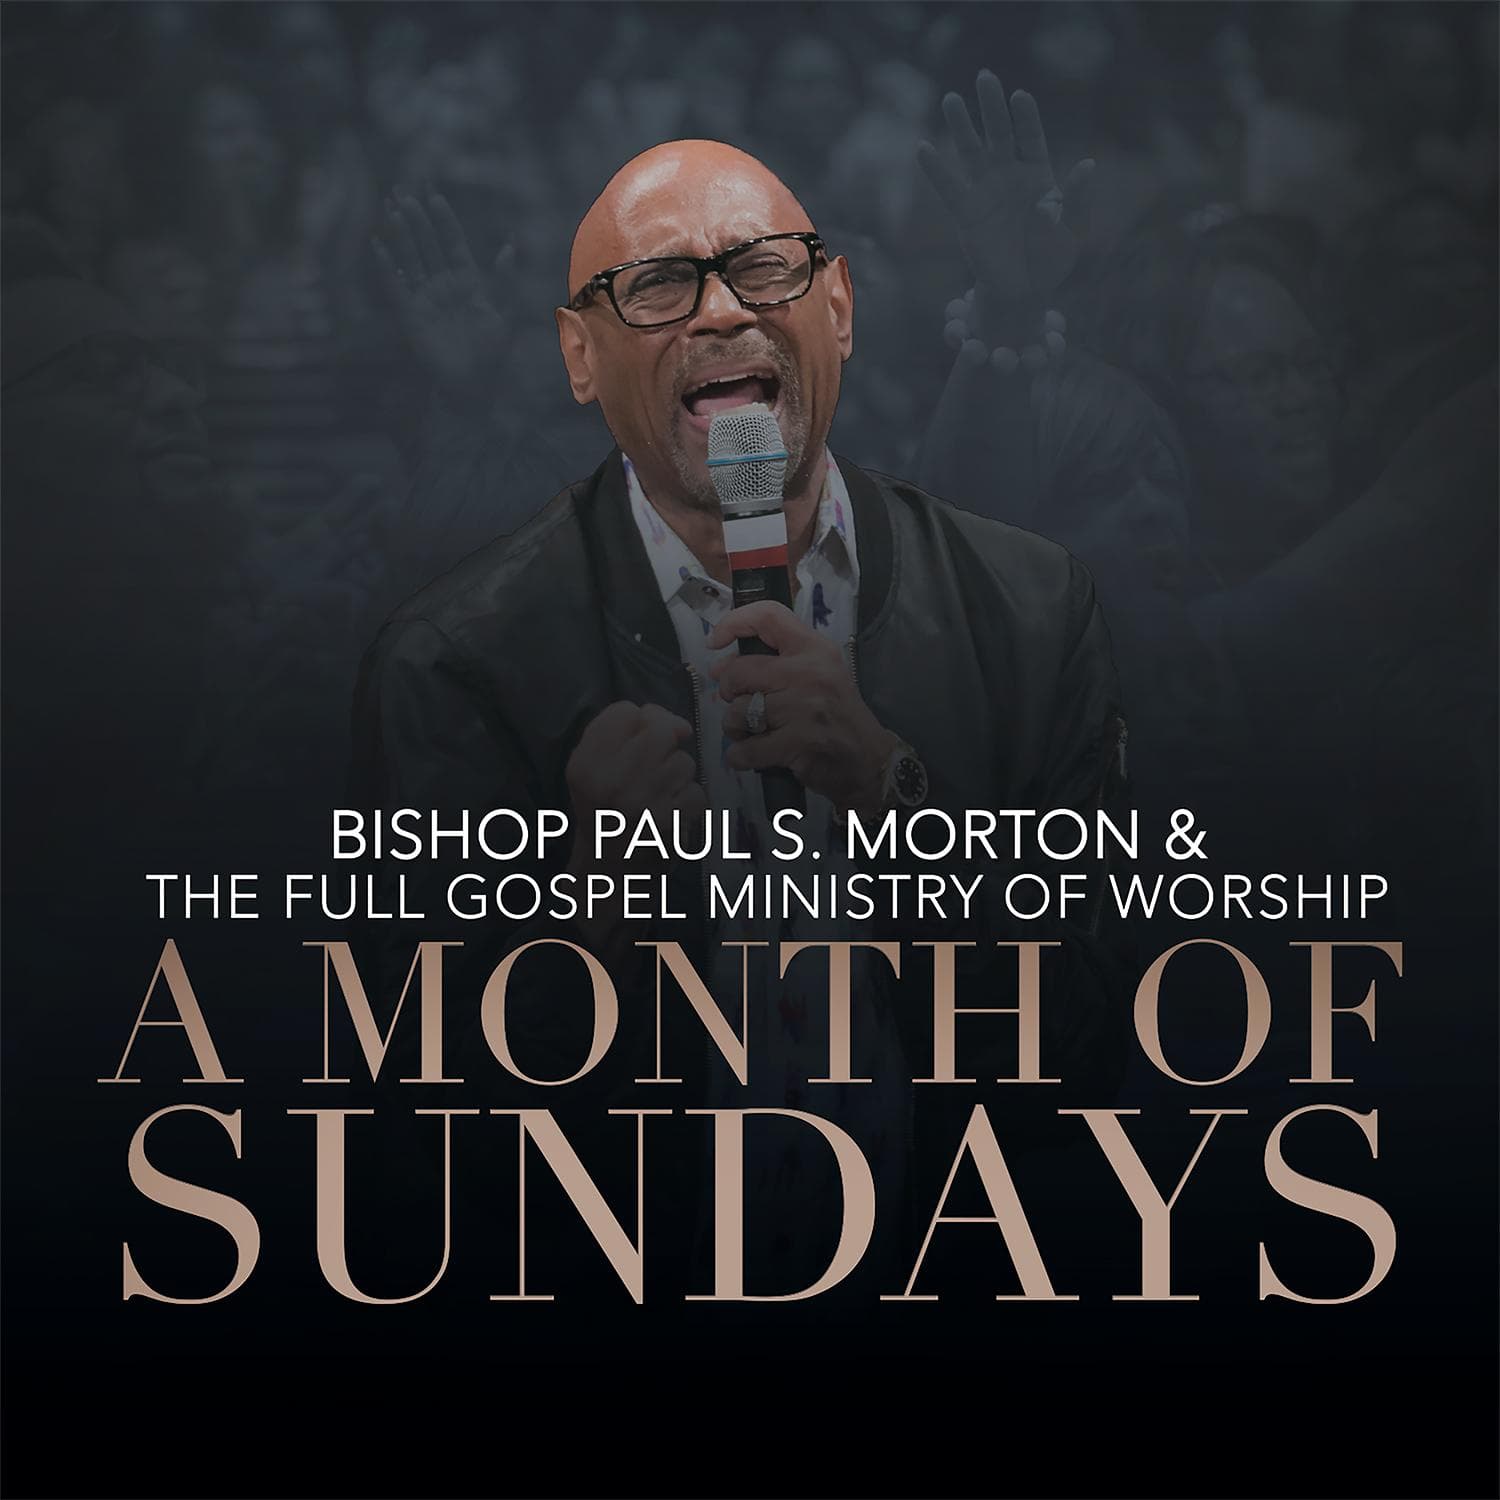 A Month Of Sundays - Bishop Paul S. Morton & The Full Gospel Ministry Of Worship